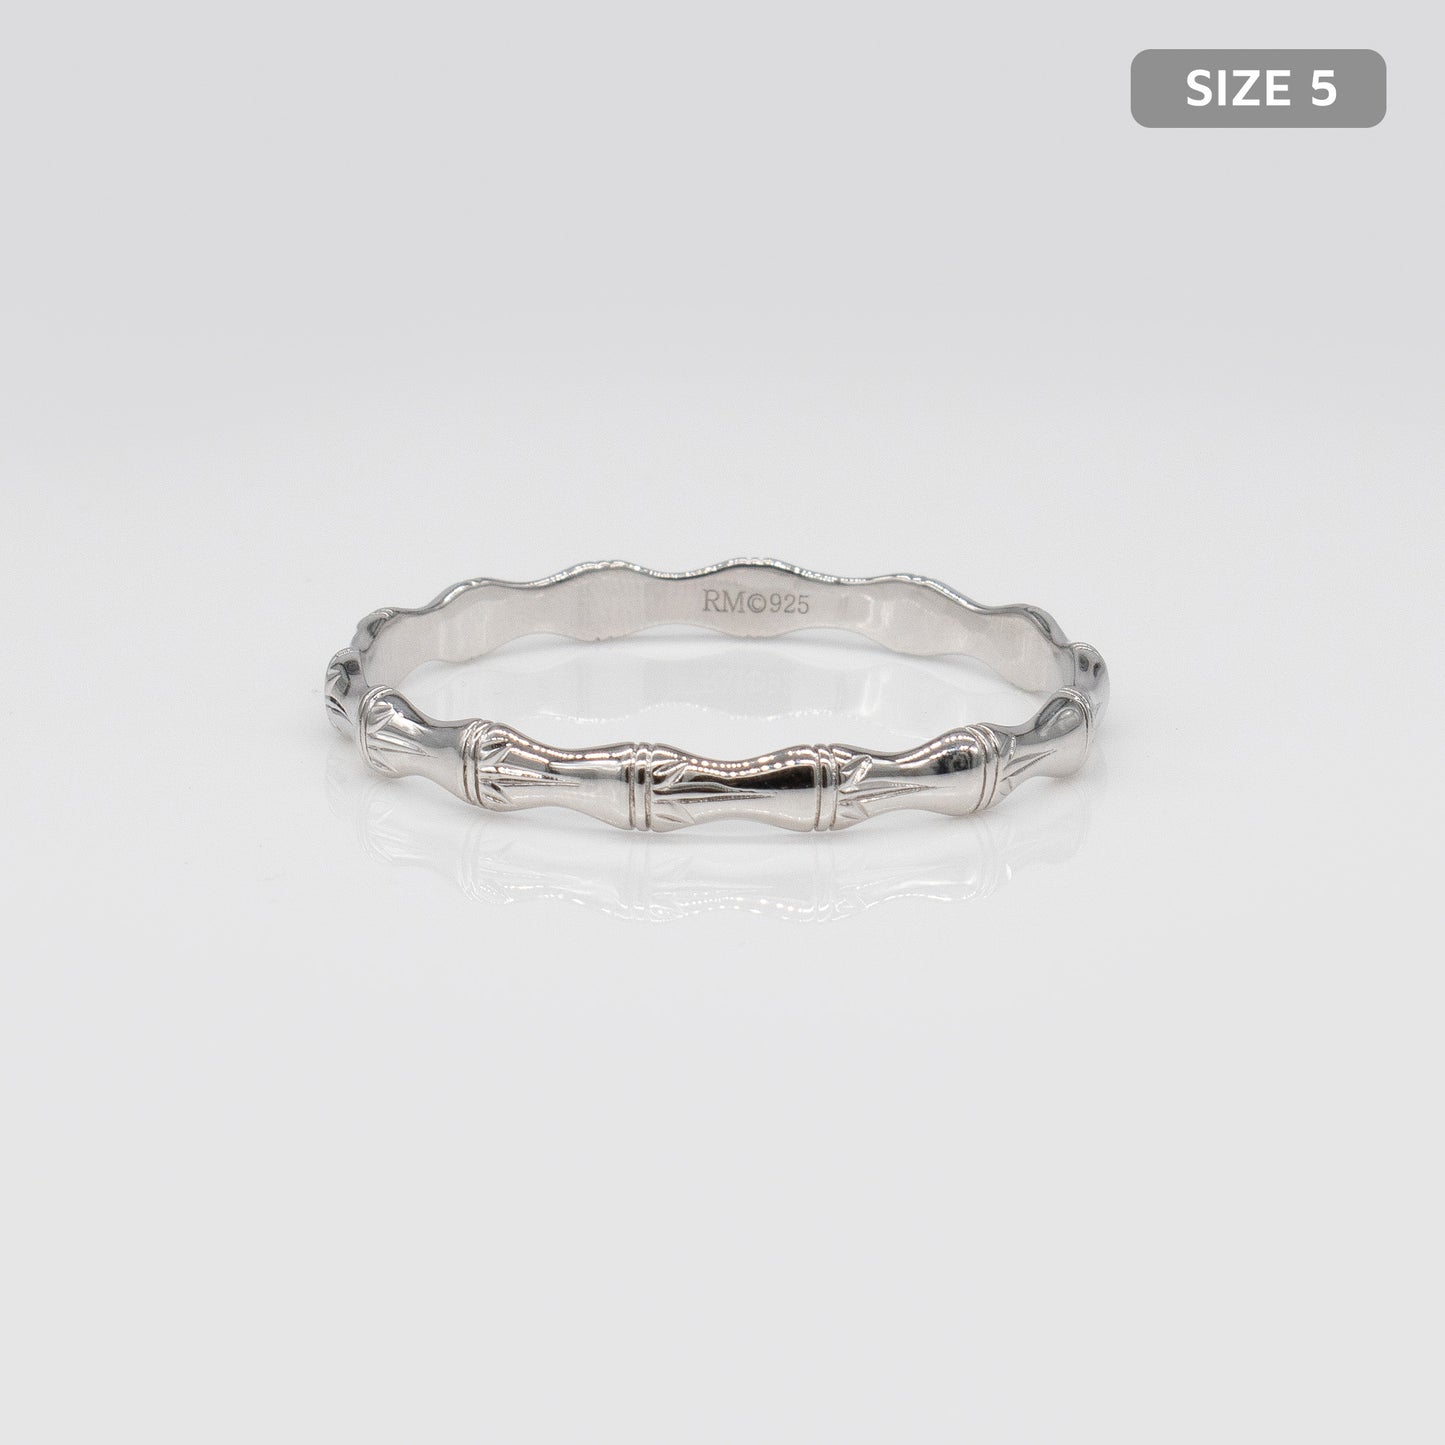 Kids Sterling Silver and Rhodium Bamboo Design Rosa Bangle. Size 5.